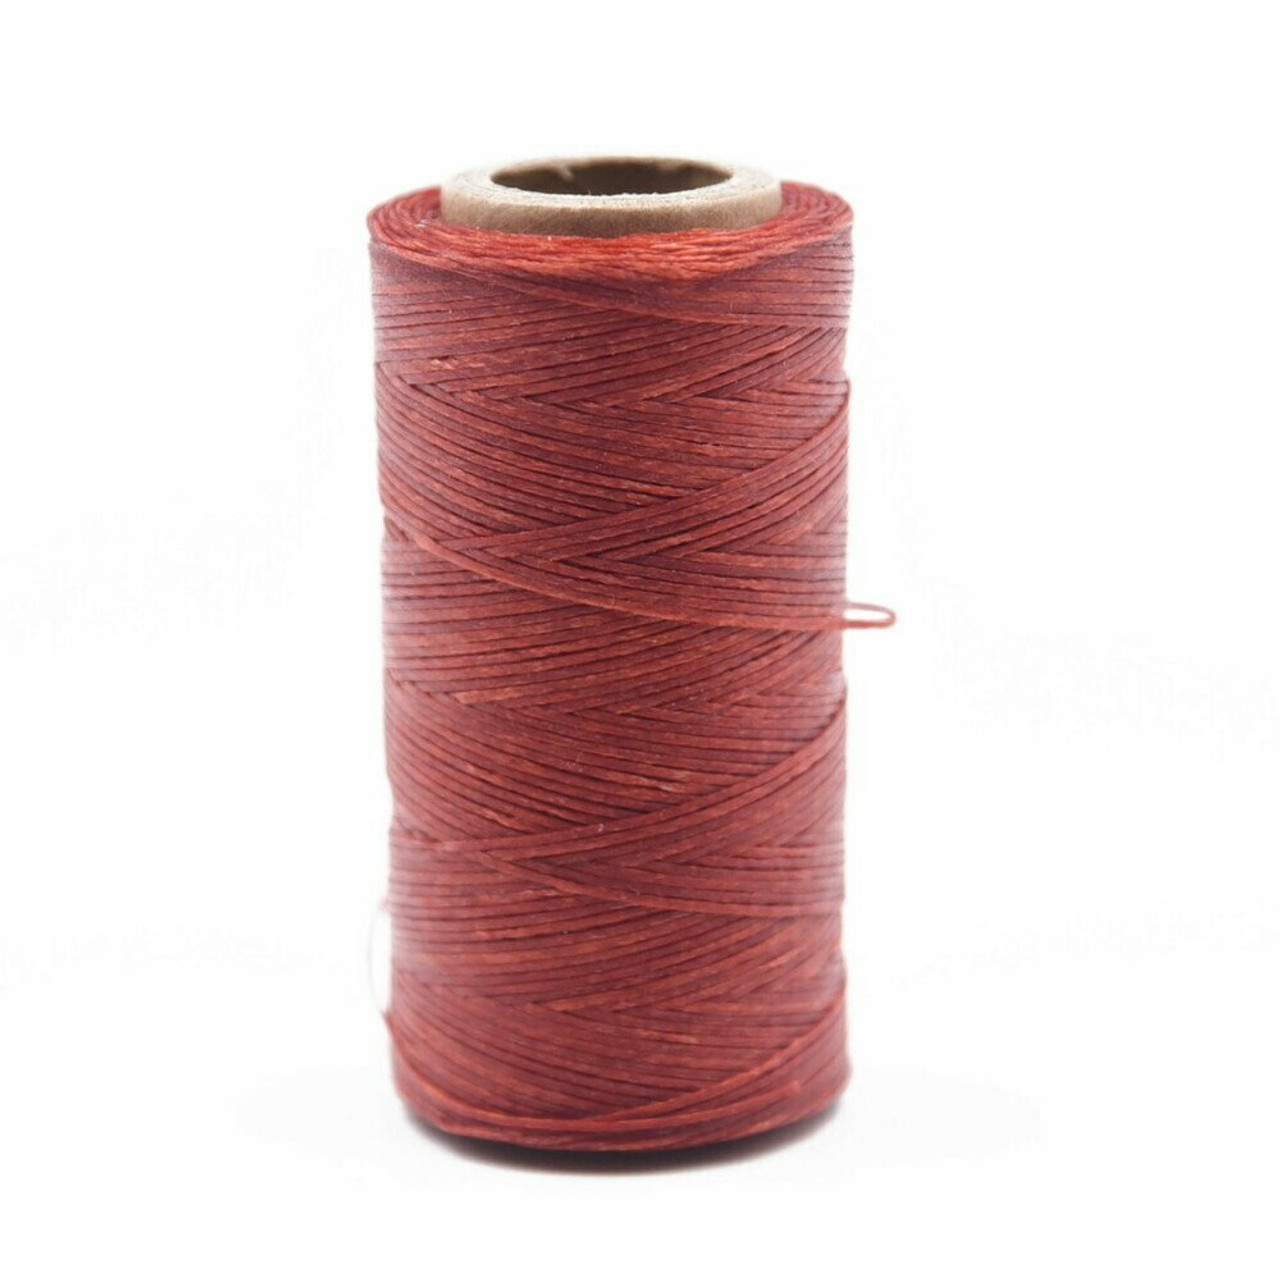 Nylon Cord Coated in Wax 1 mm, Red, Sold by 220m Spool